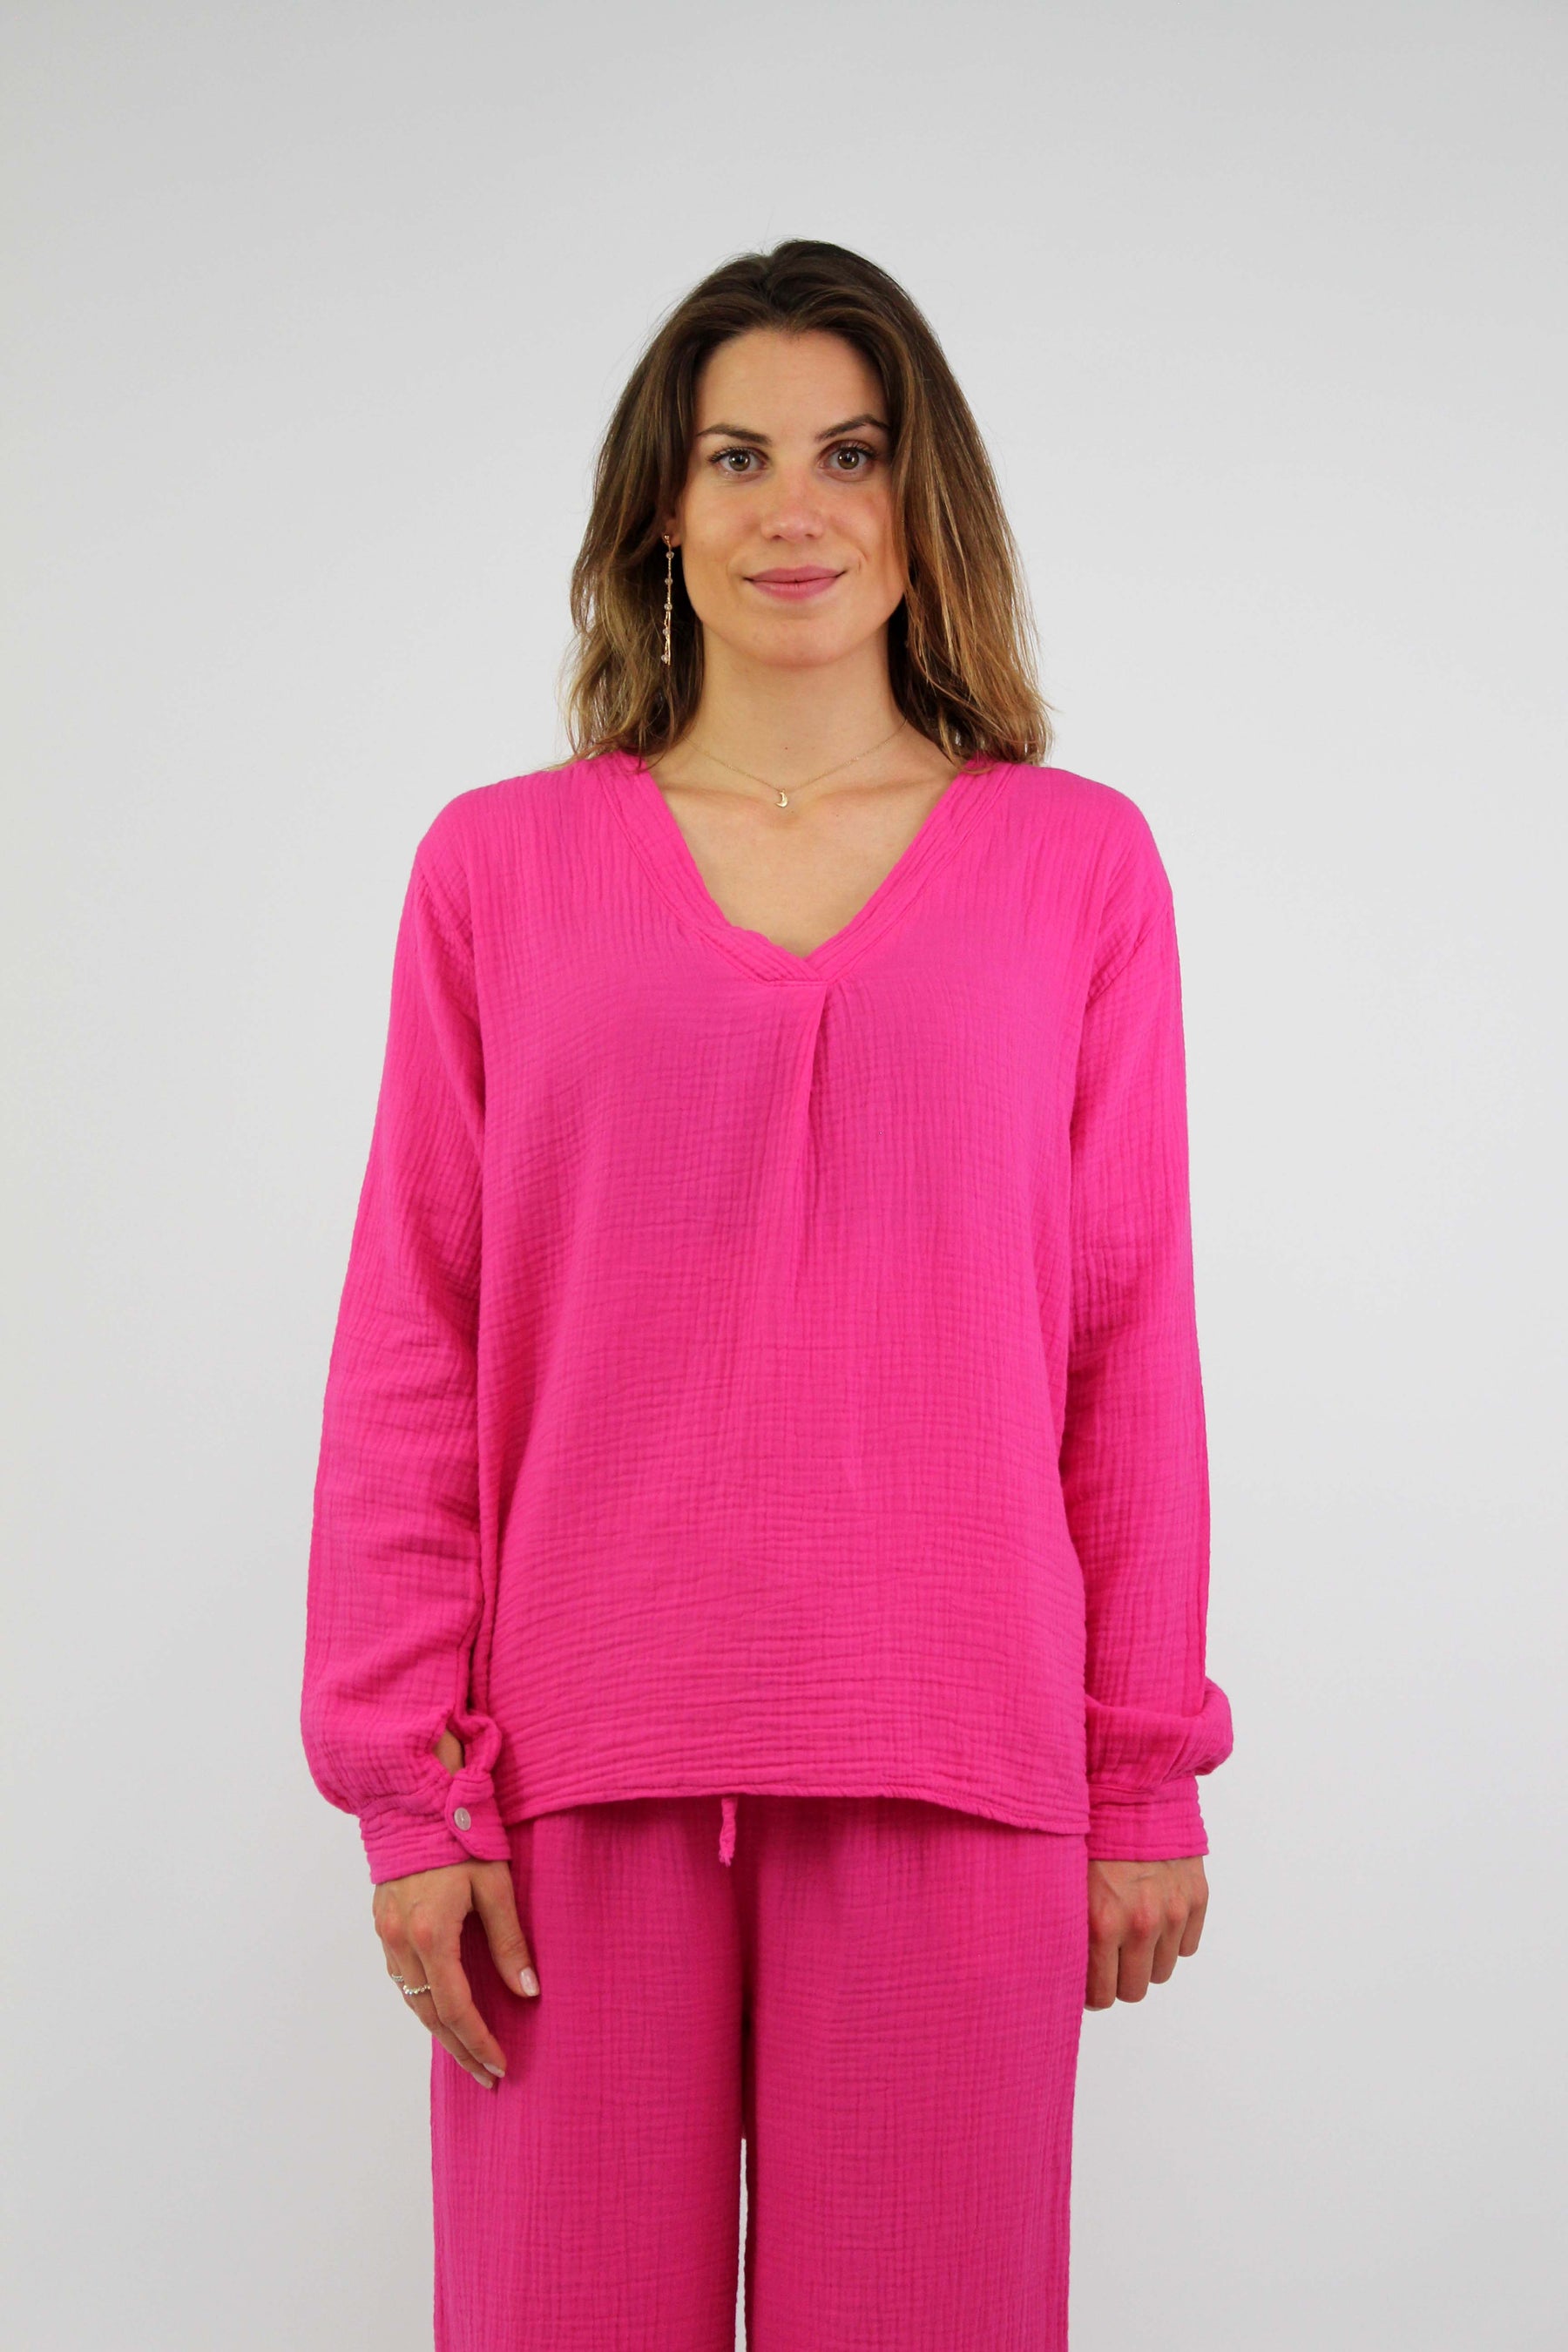 Musselin Bluse - Pink